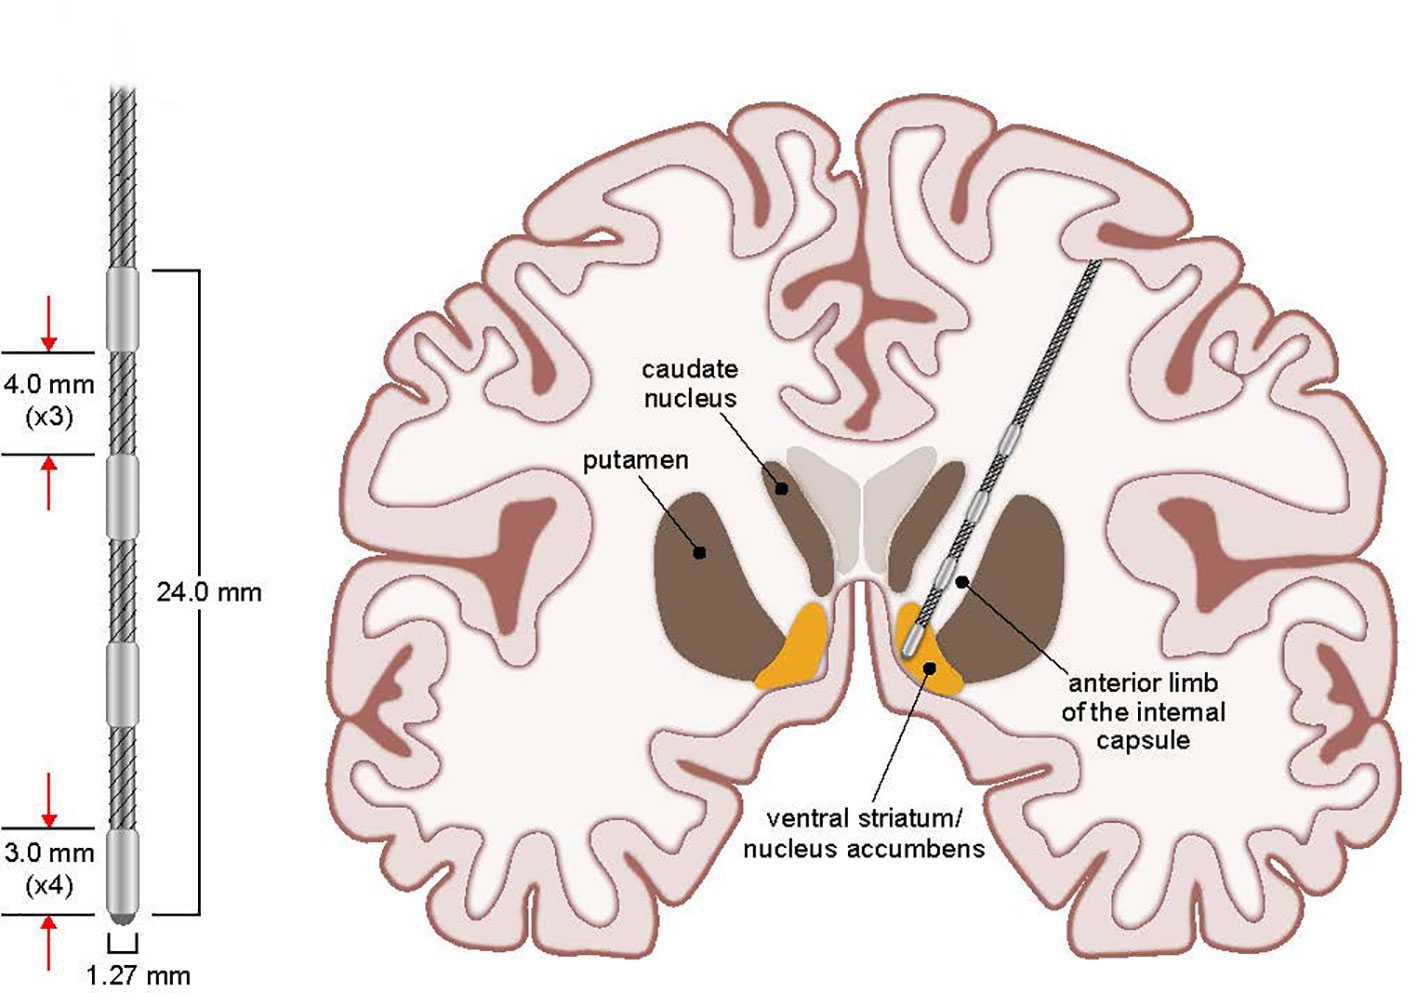 Frontiers Deep Brain Stimulation For Obsessive Compulsive Disorder A Long Term Naturalistic Follow Up Study In A Single Institution